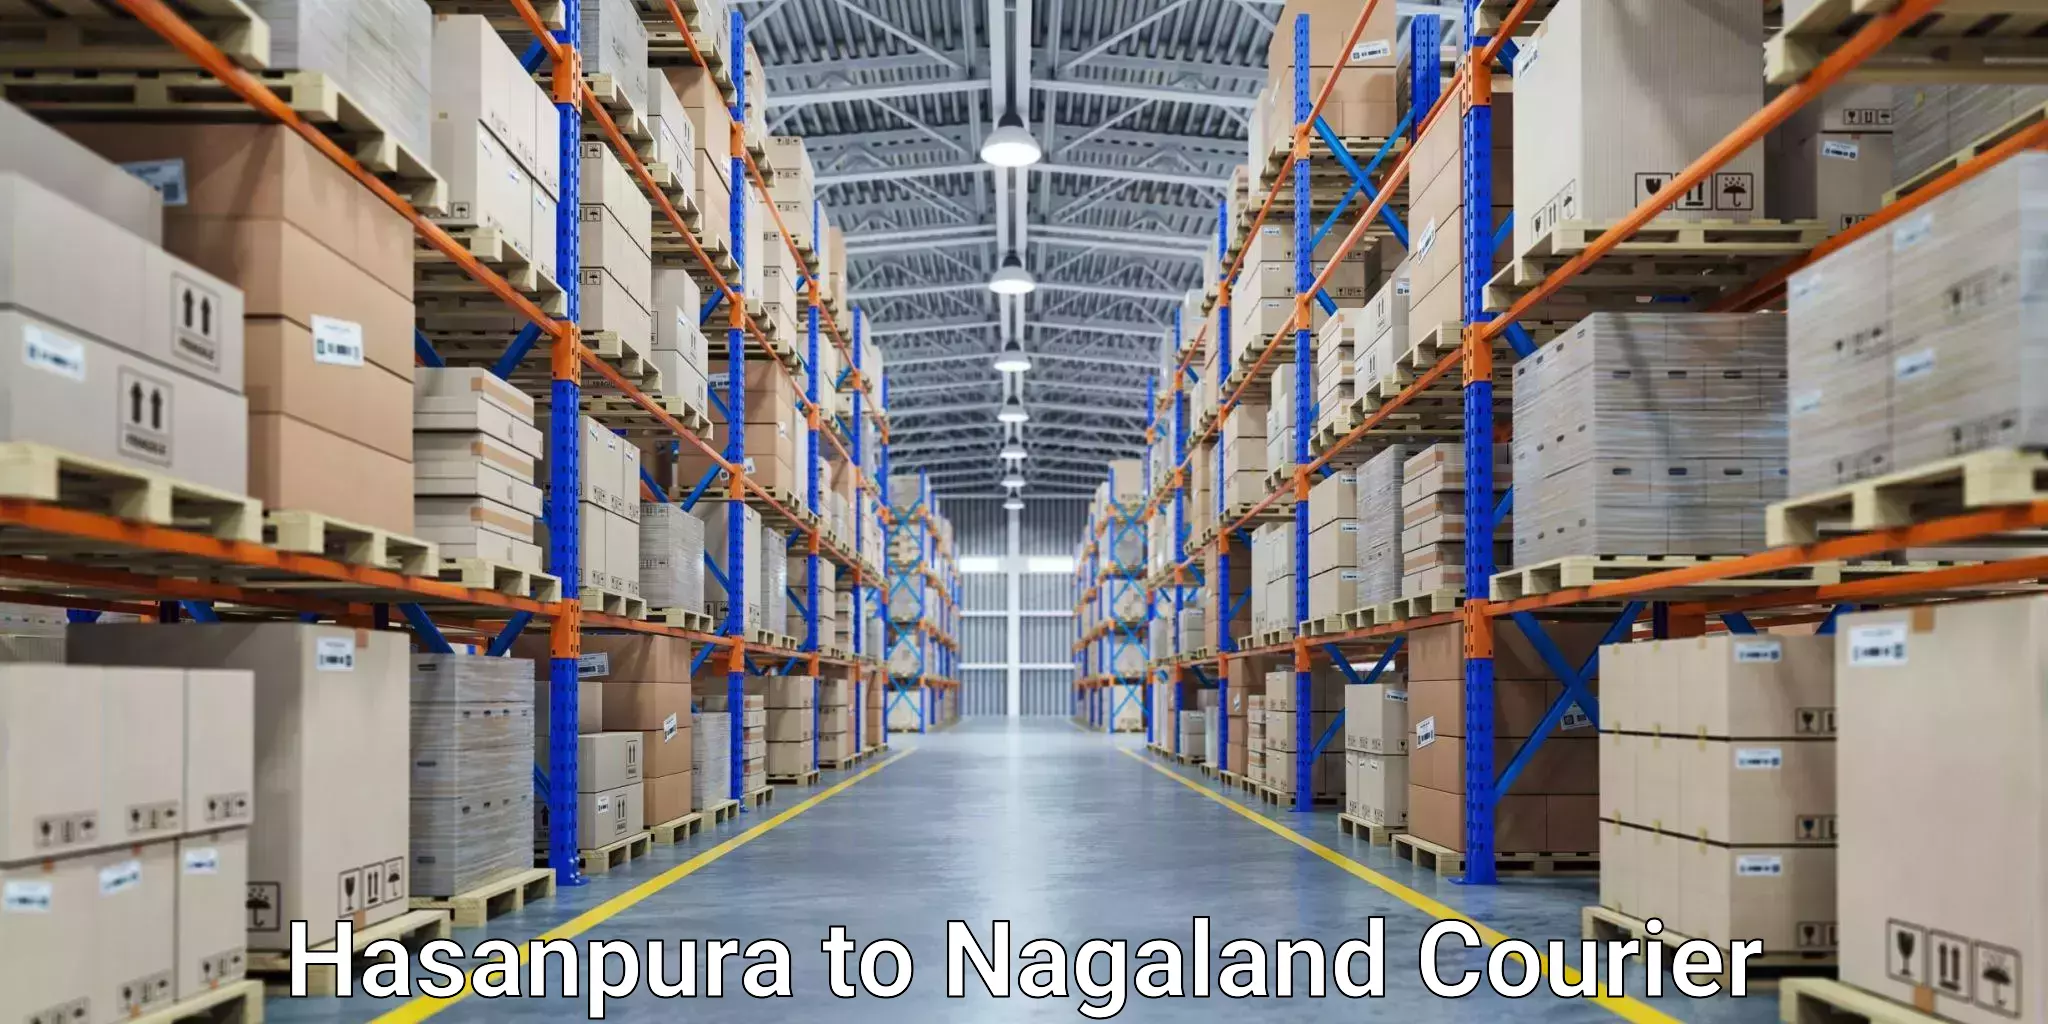 Enhanced tracking features in Hasanpura to Nagaland